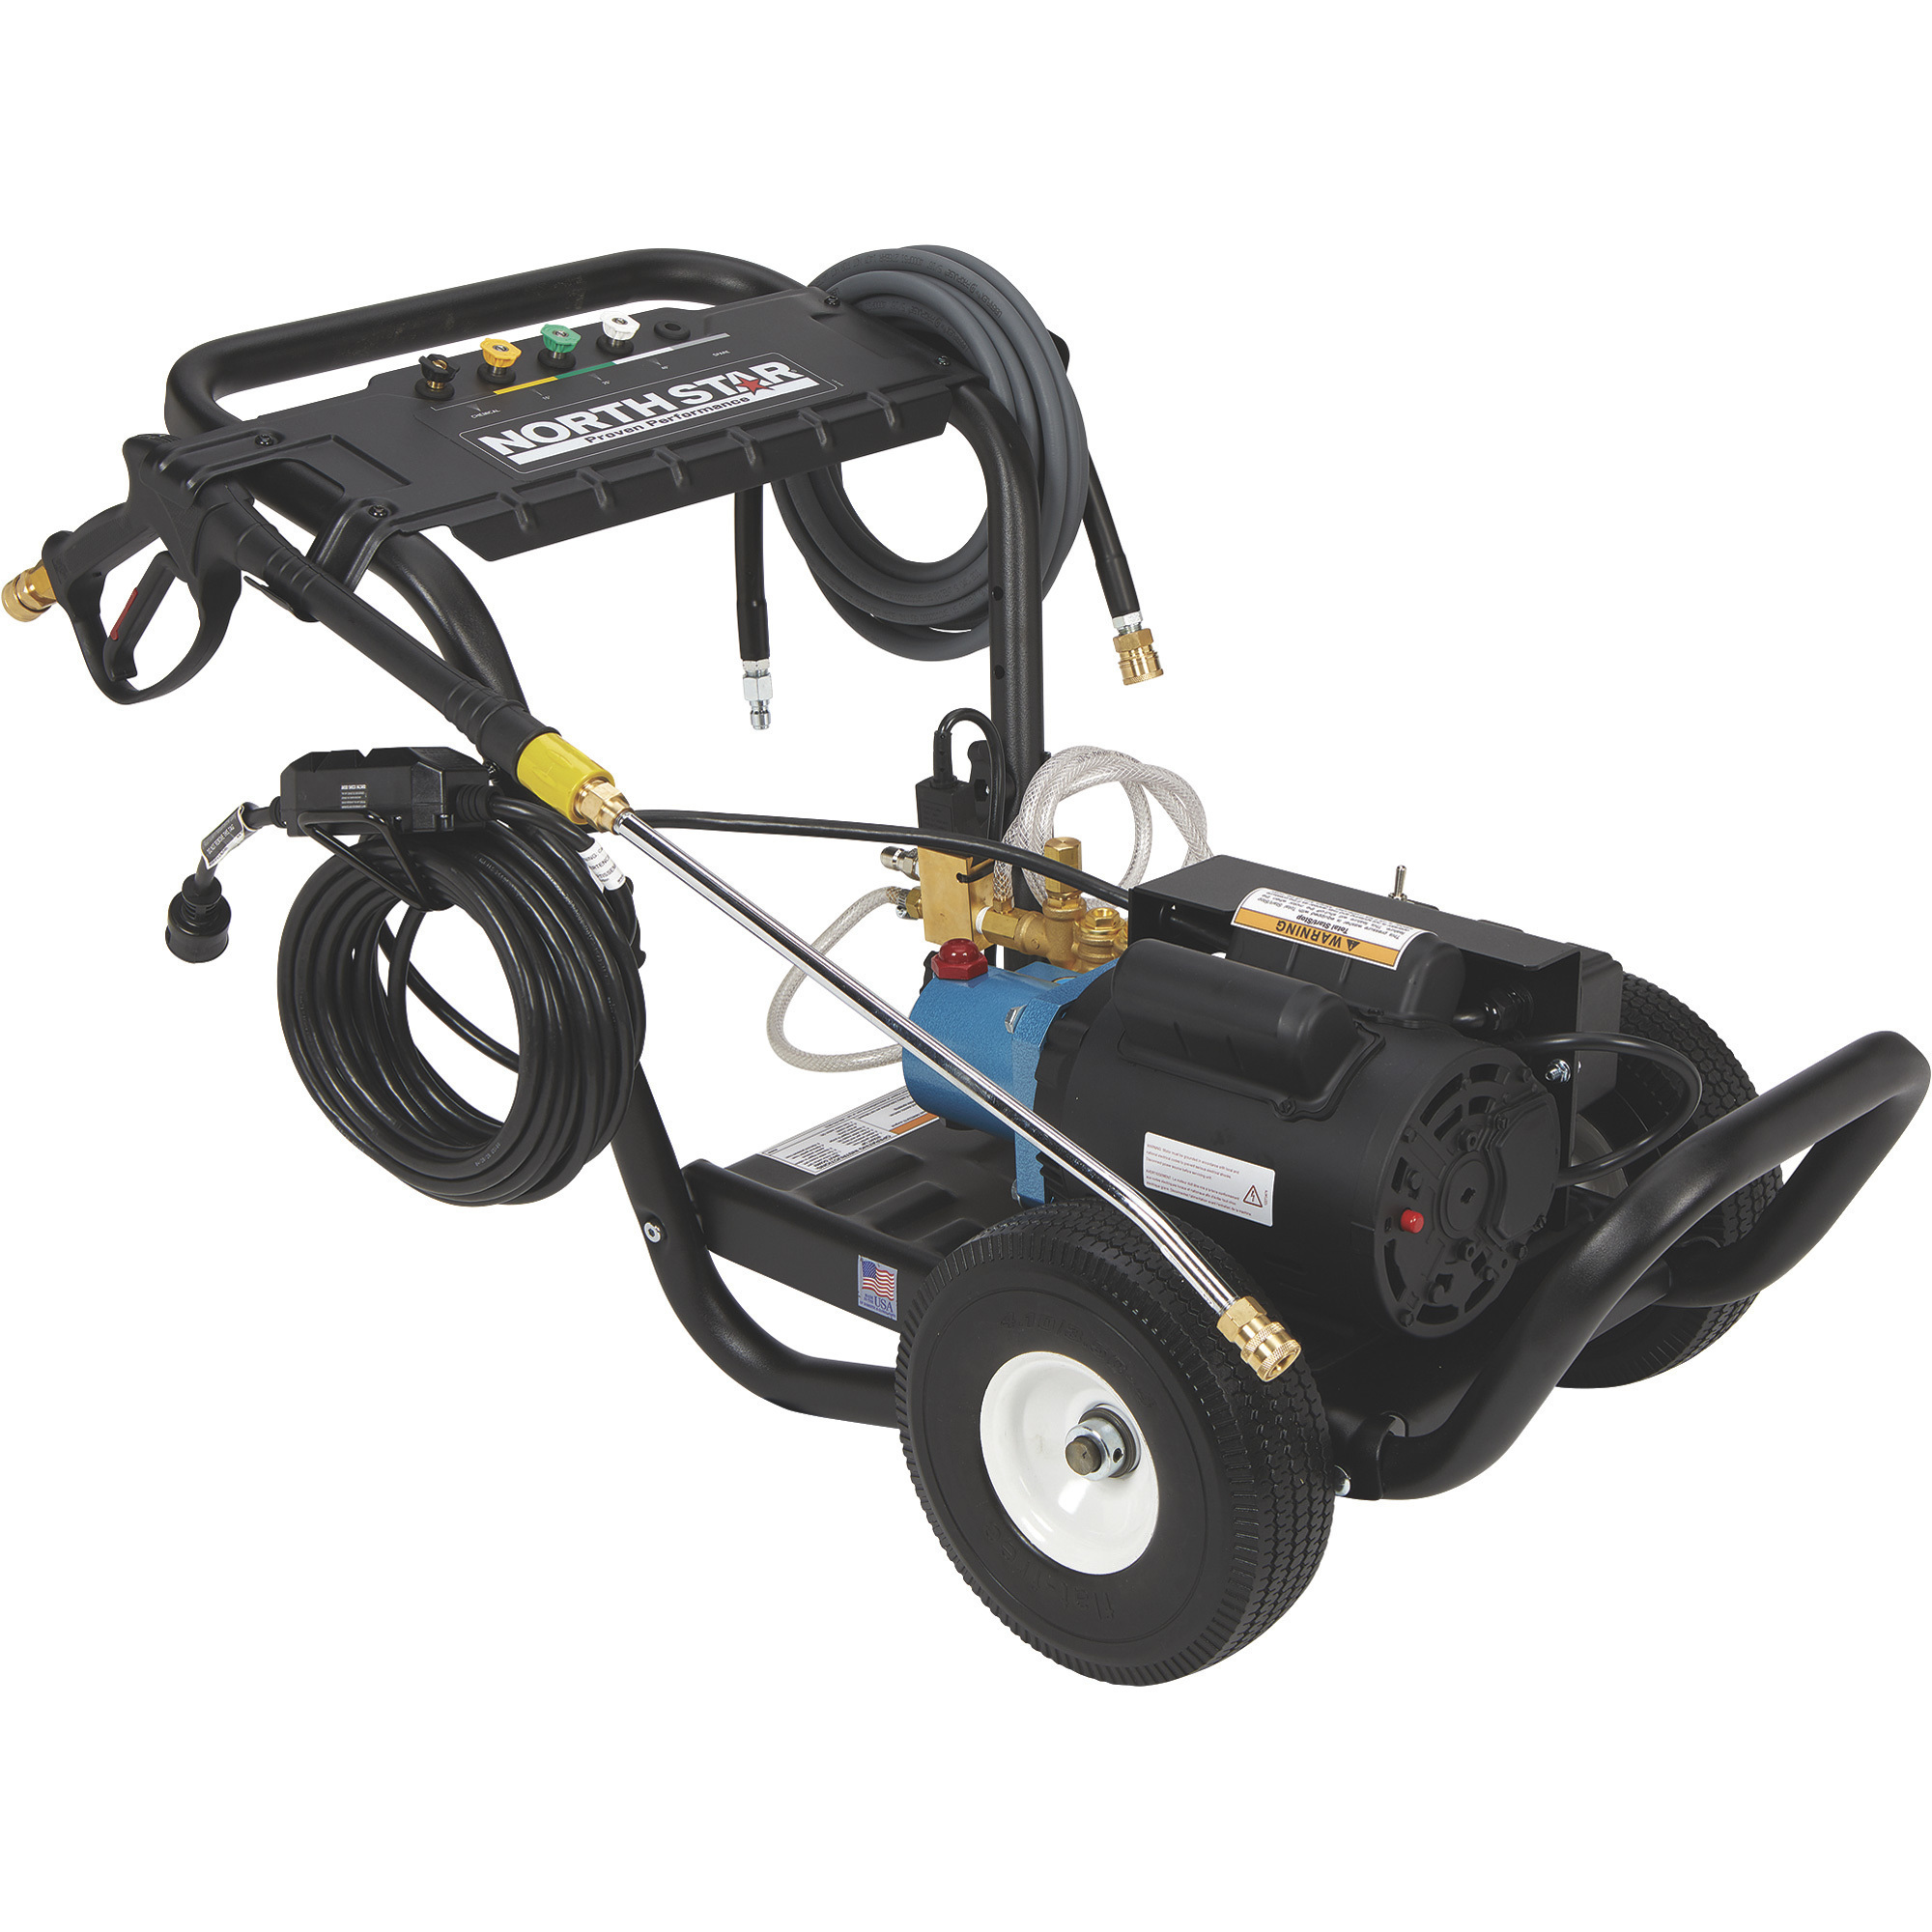 BE Professional 2000 PSI (Electric - Cold Water) Wall Mount Pressure Washer  w/ Auto Stop-Start